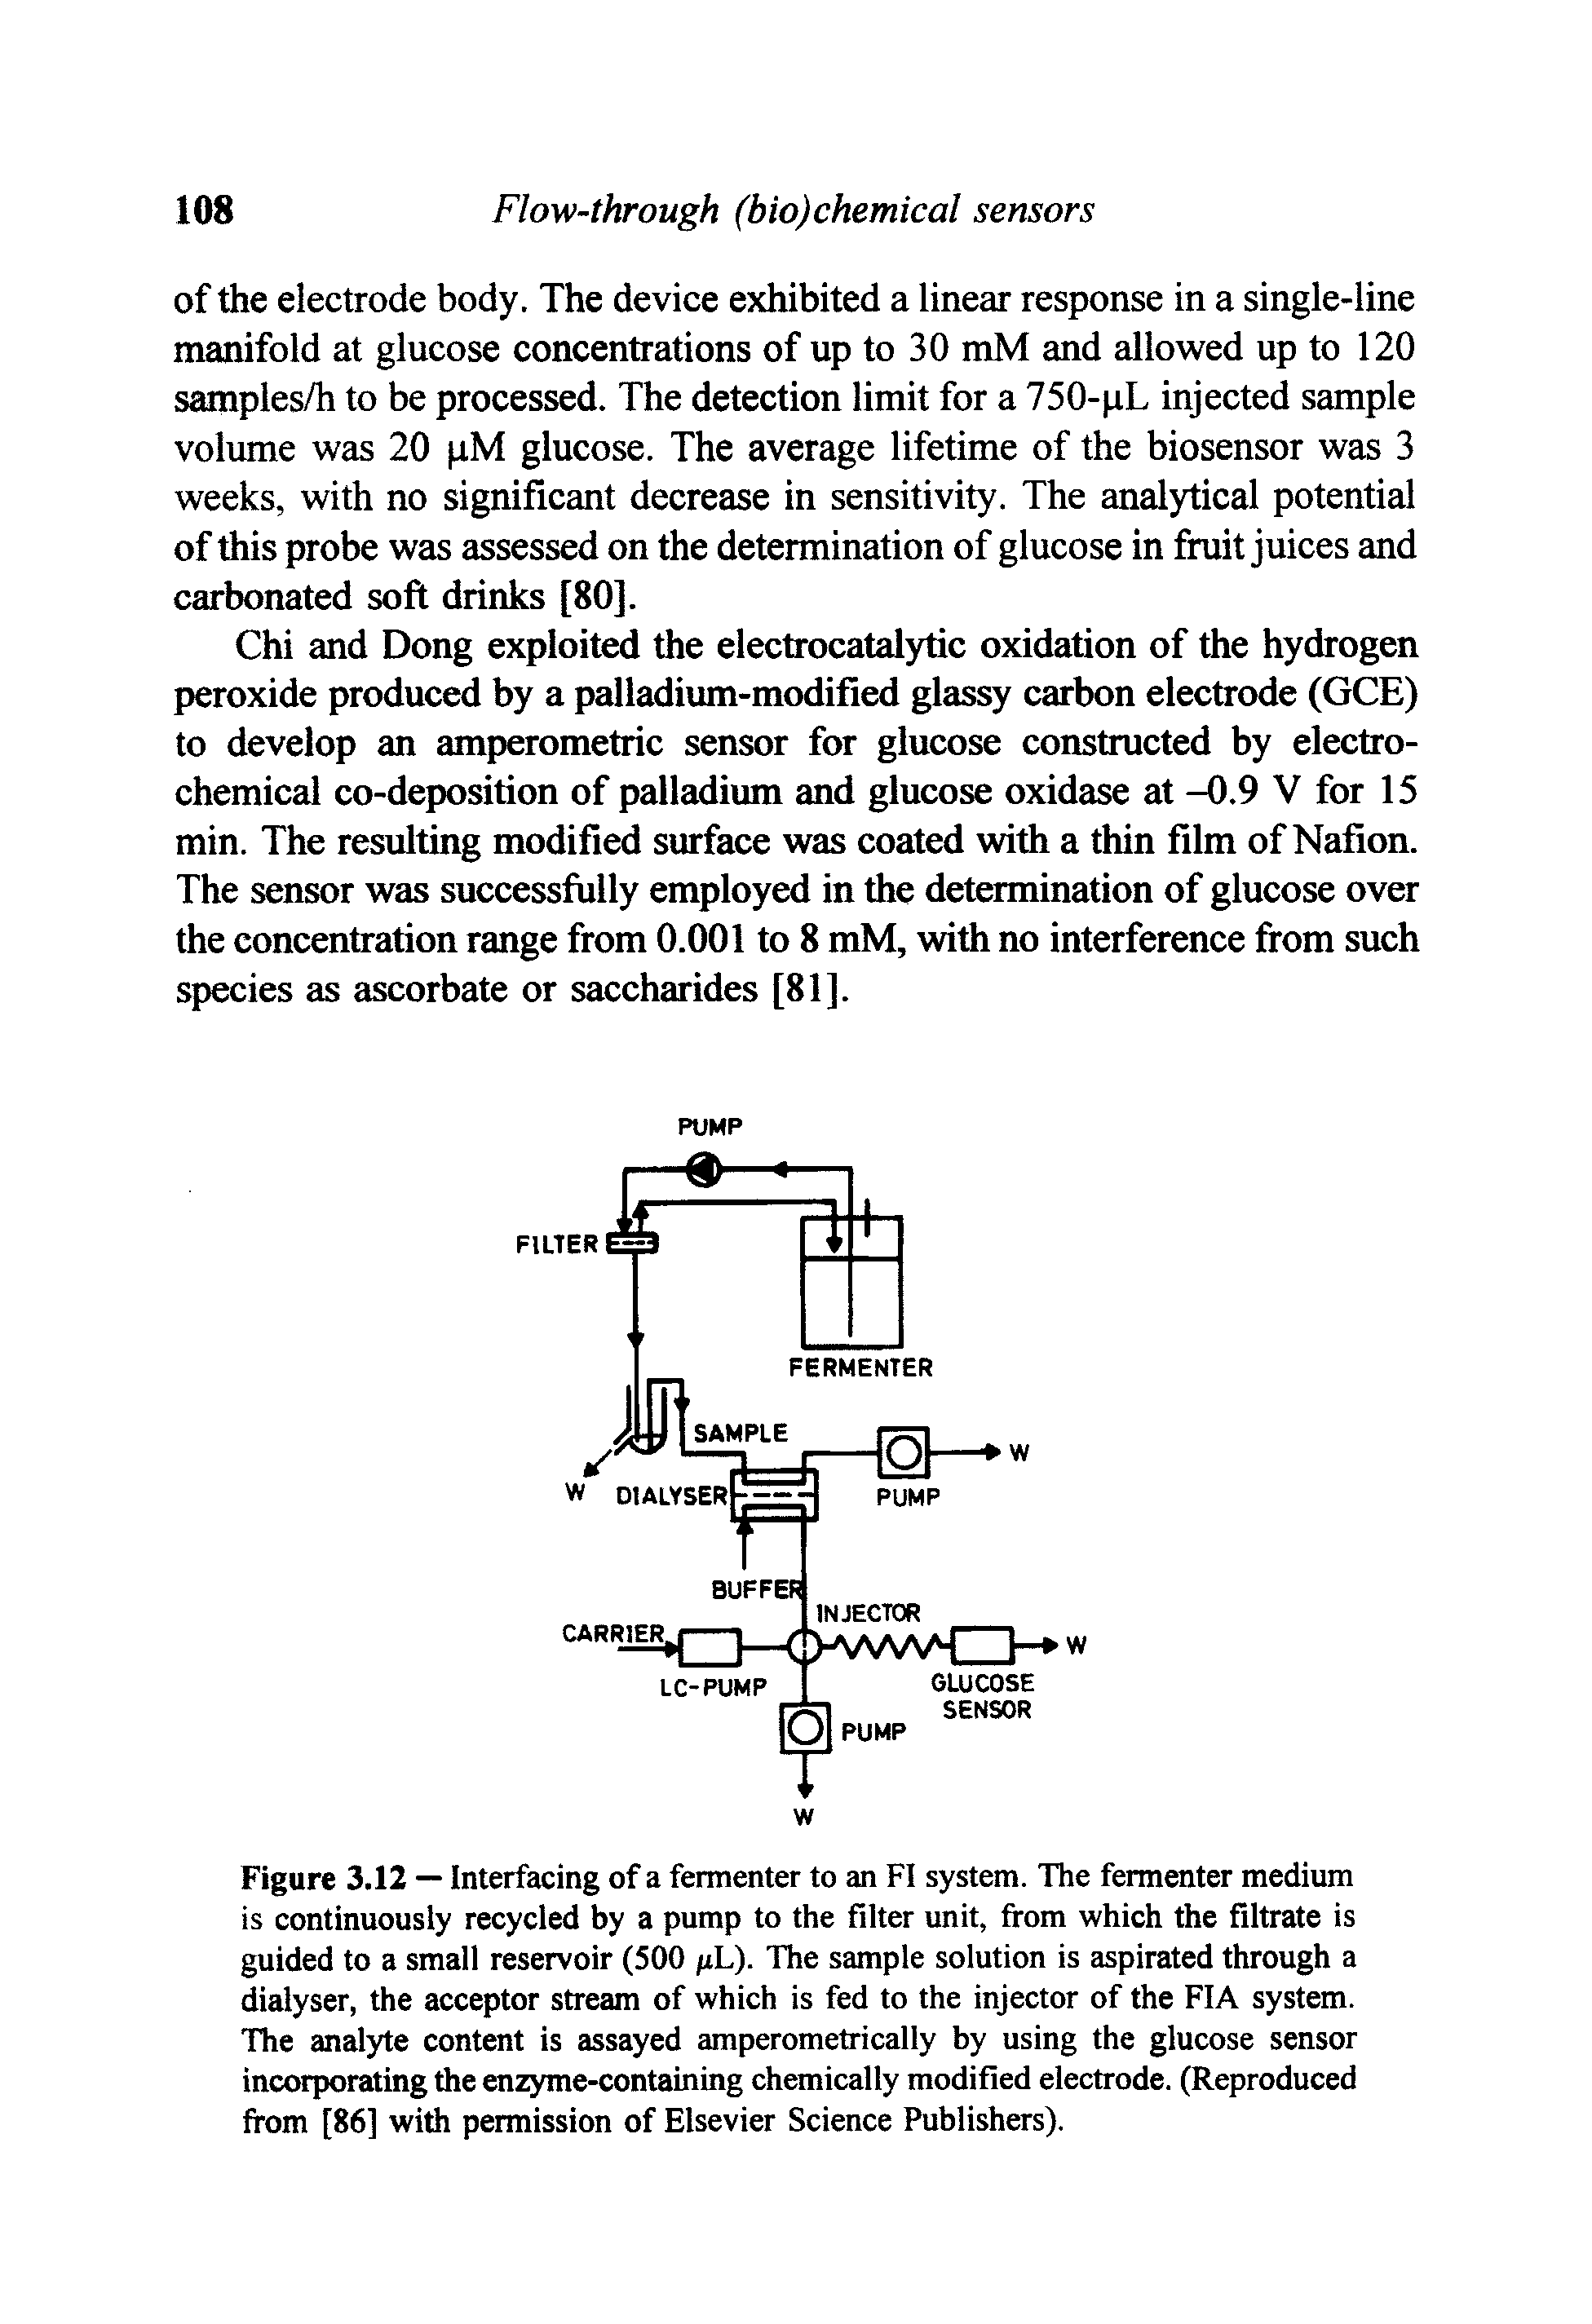 Figure 3.12 — Interfacing of a fermenter to an FI system. The fermenter medium is continuously recycled by a pump to the filter unit, from which the filtrate is guided to a small reservoir (500 /xL). The sample solution is aspirated through a dialyser, the acceptor stream of which is fed to the injector of the FIA system. The analyte content is assayed amperometrically by using the glucose sensor incorporating the enzyme-containing chemically modified electrode. (Reproduced from [86] with permission of Elsevier Science Publishers).